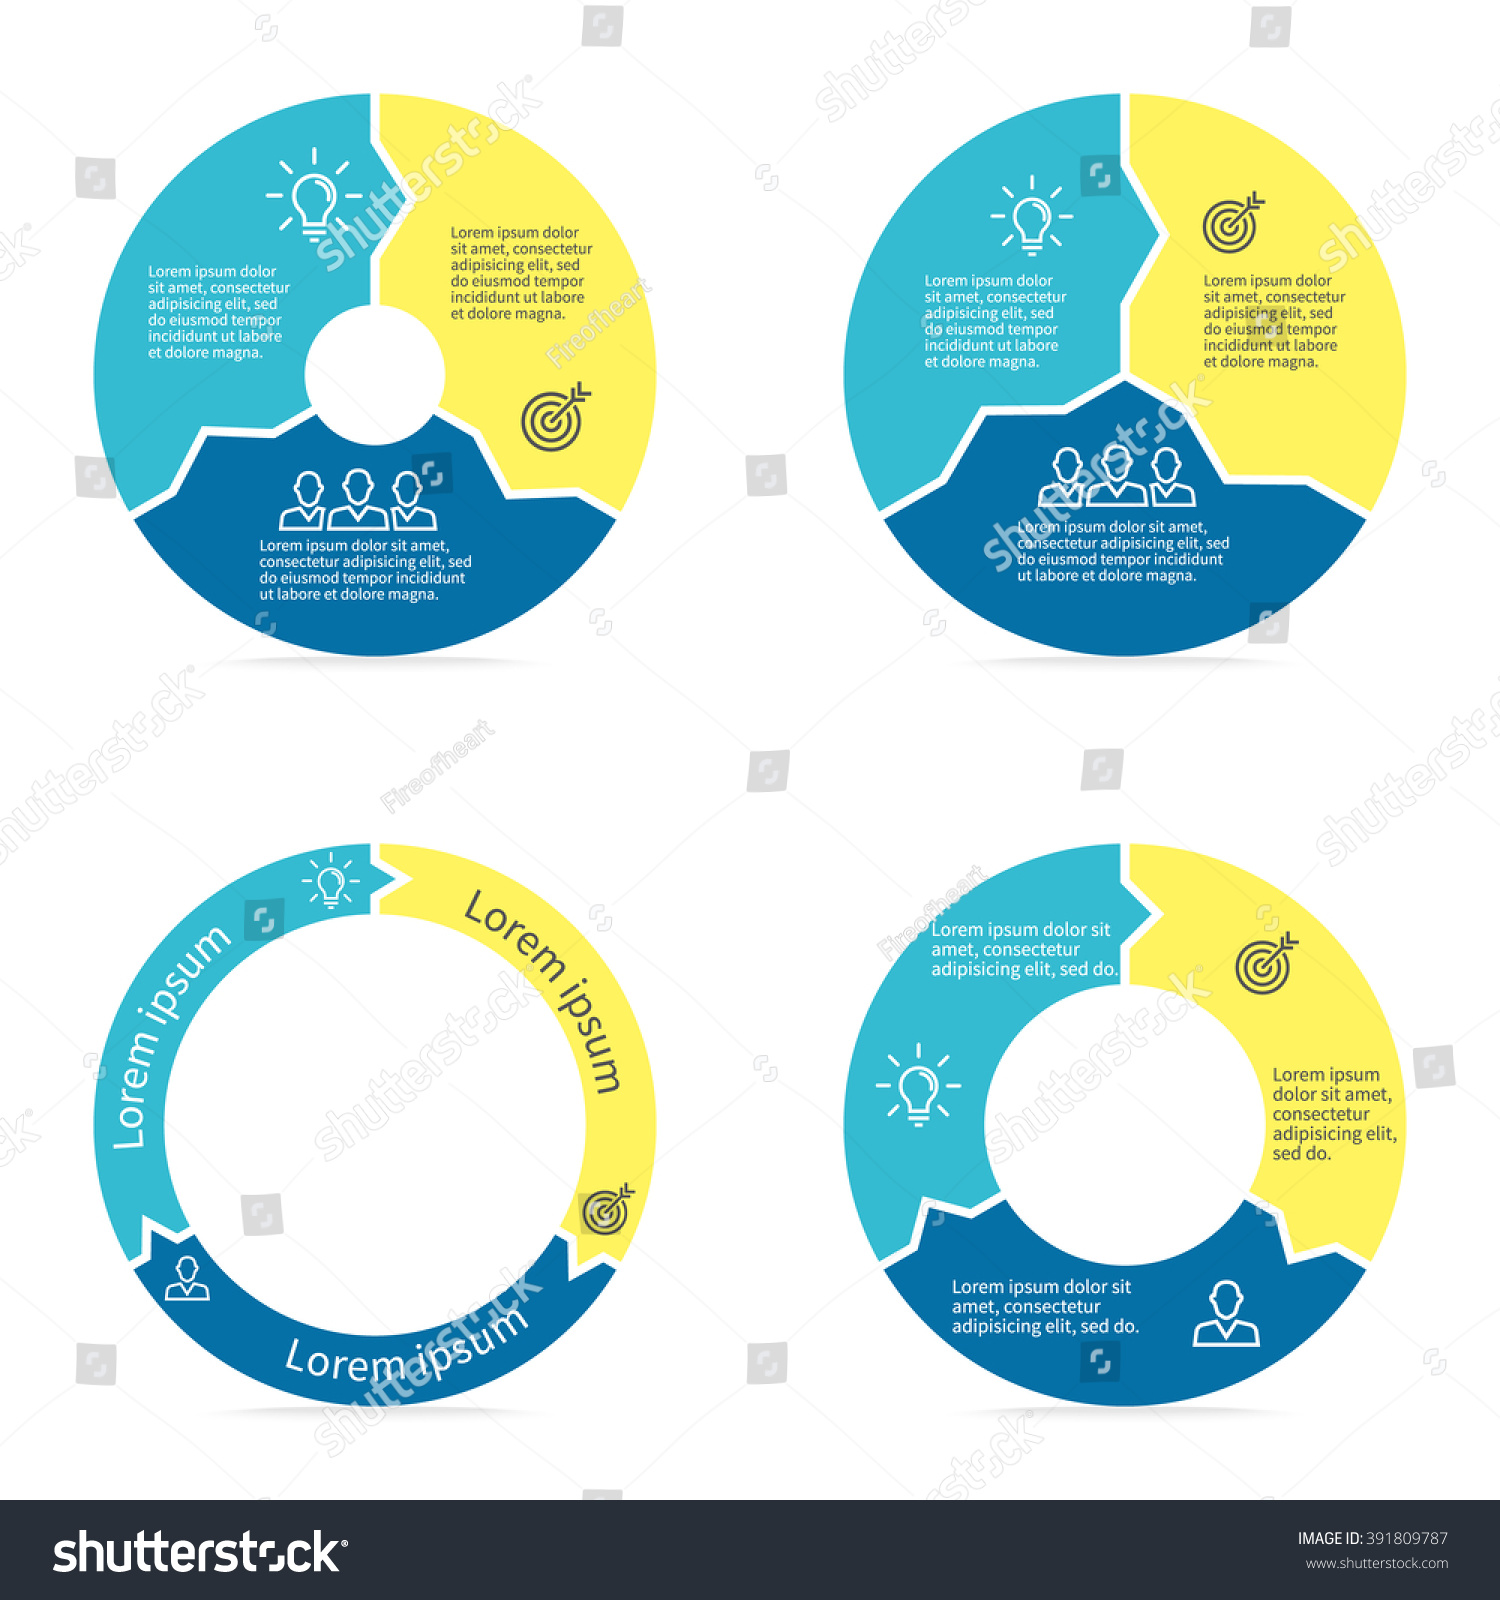 Circular Infographics Step By Step With Colored Royalty Free Stock Vector 391809787 0084